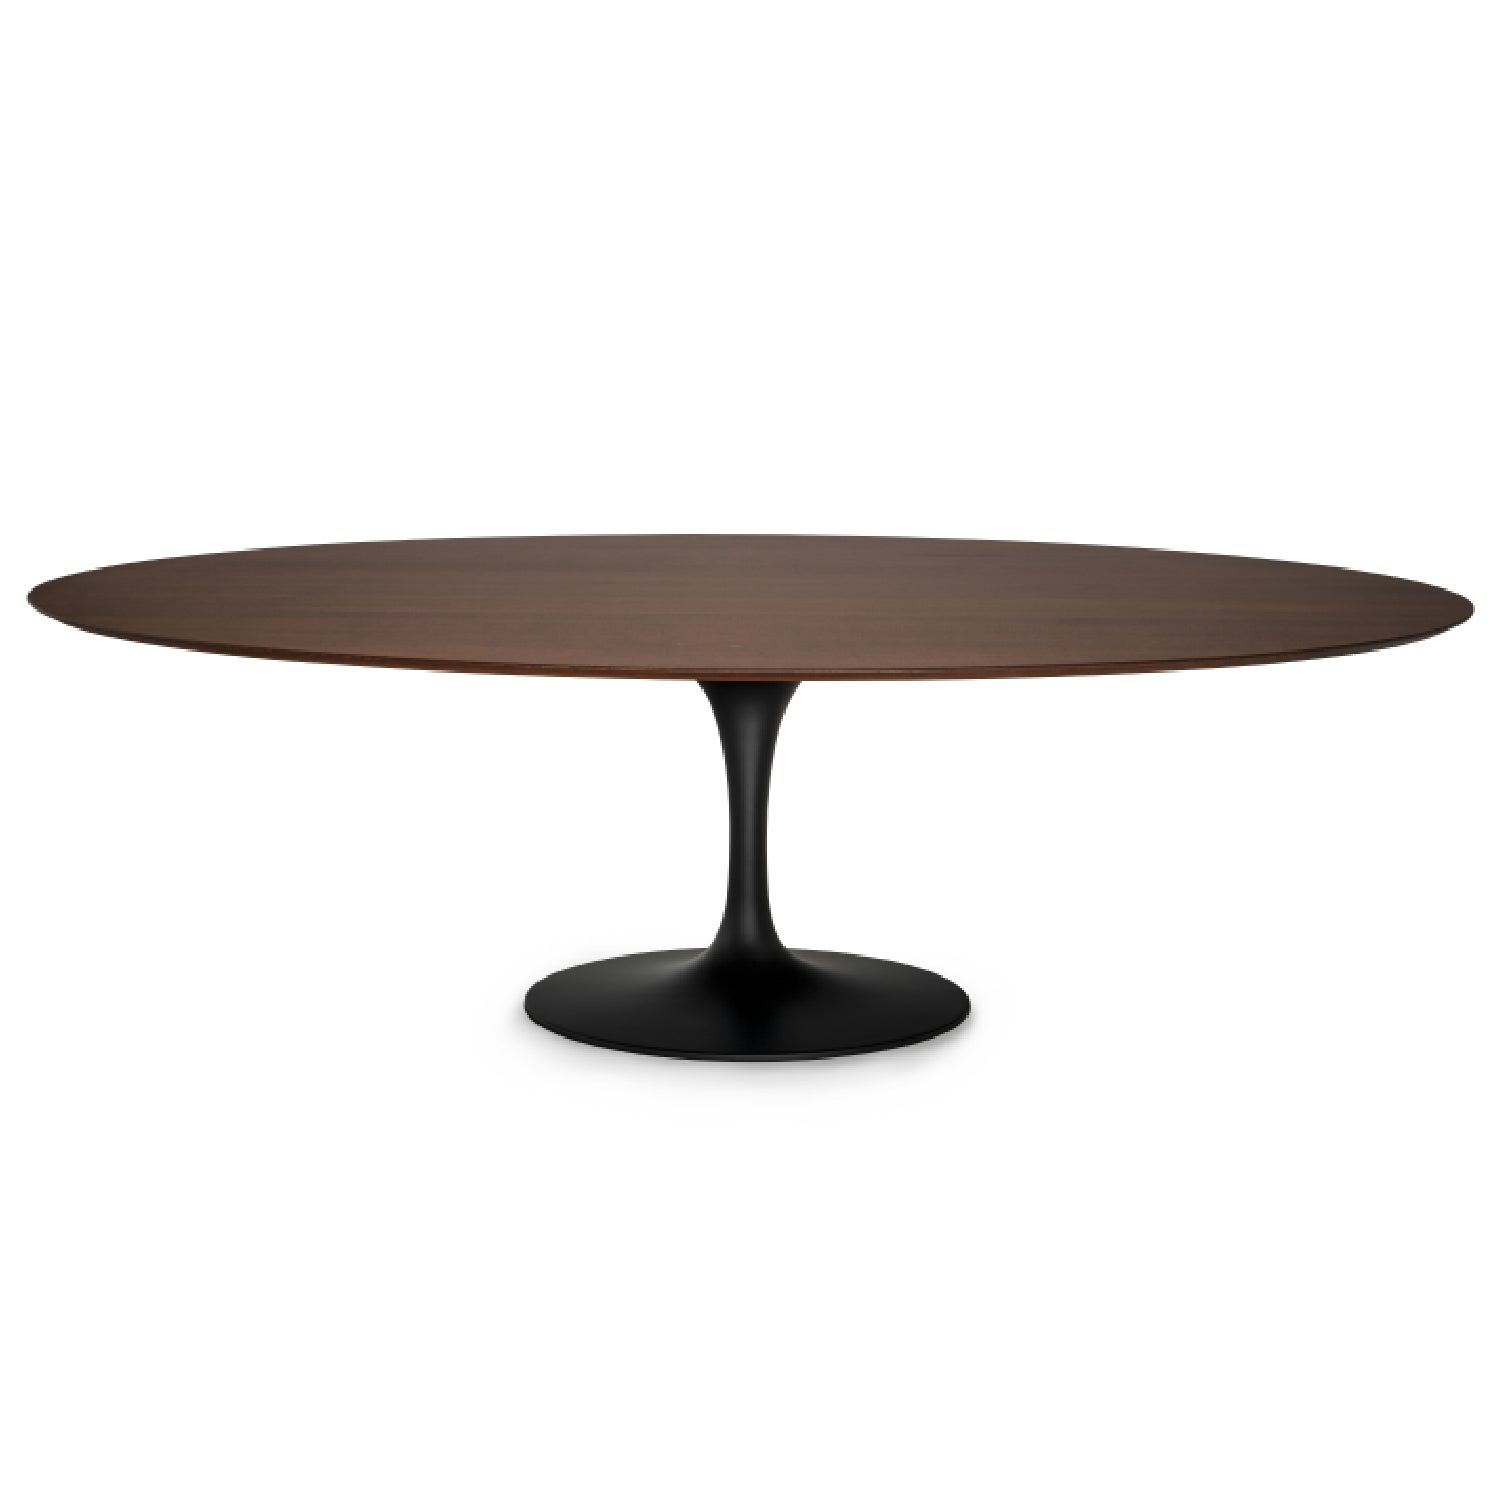  Art. 2002 Oval Dining Table with Wooden Top